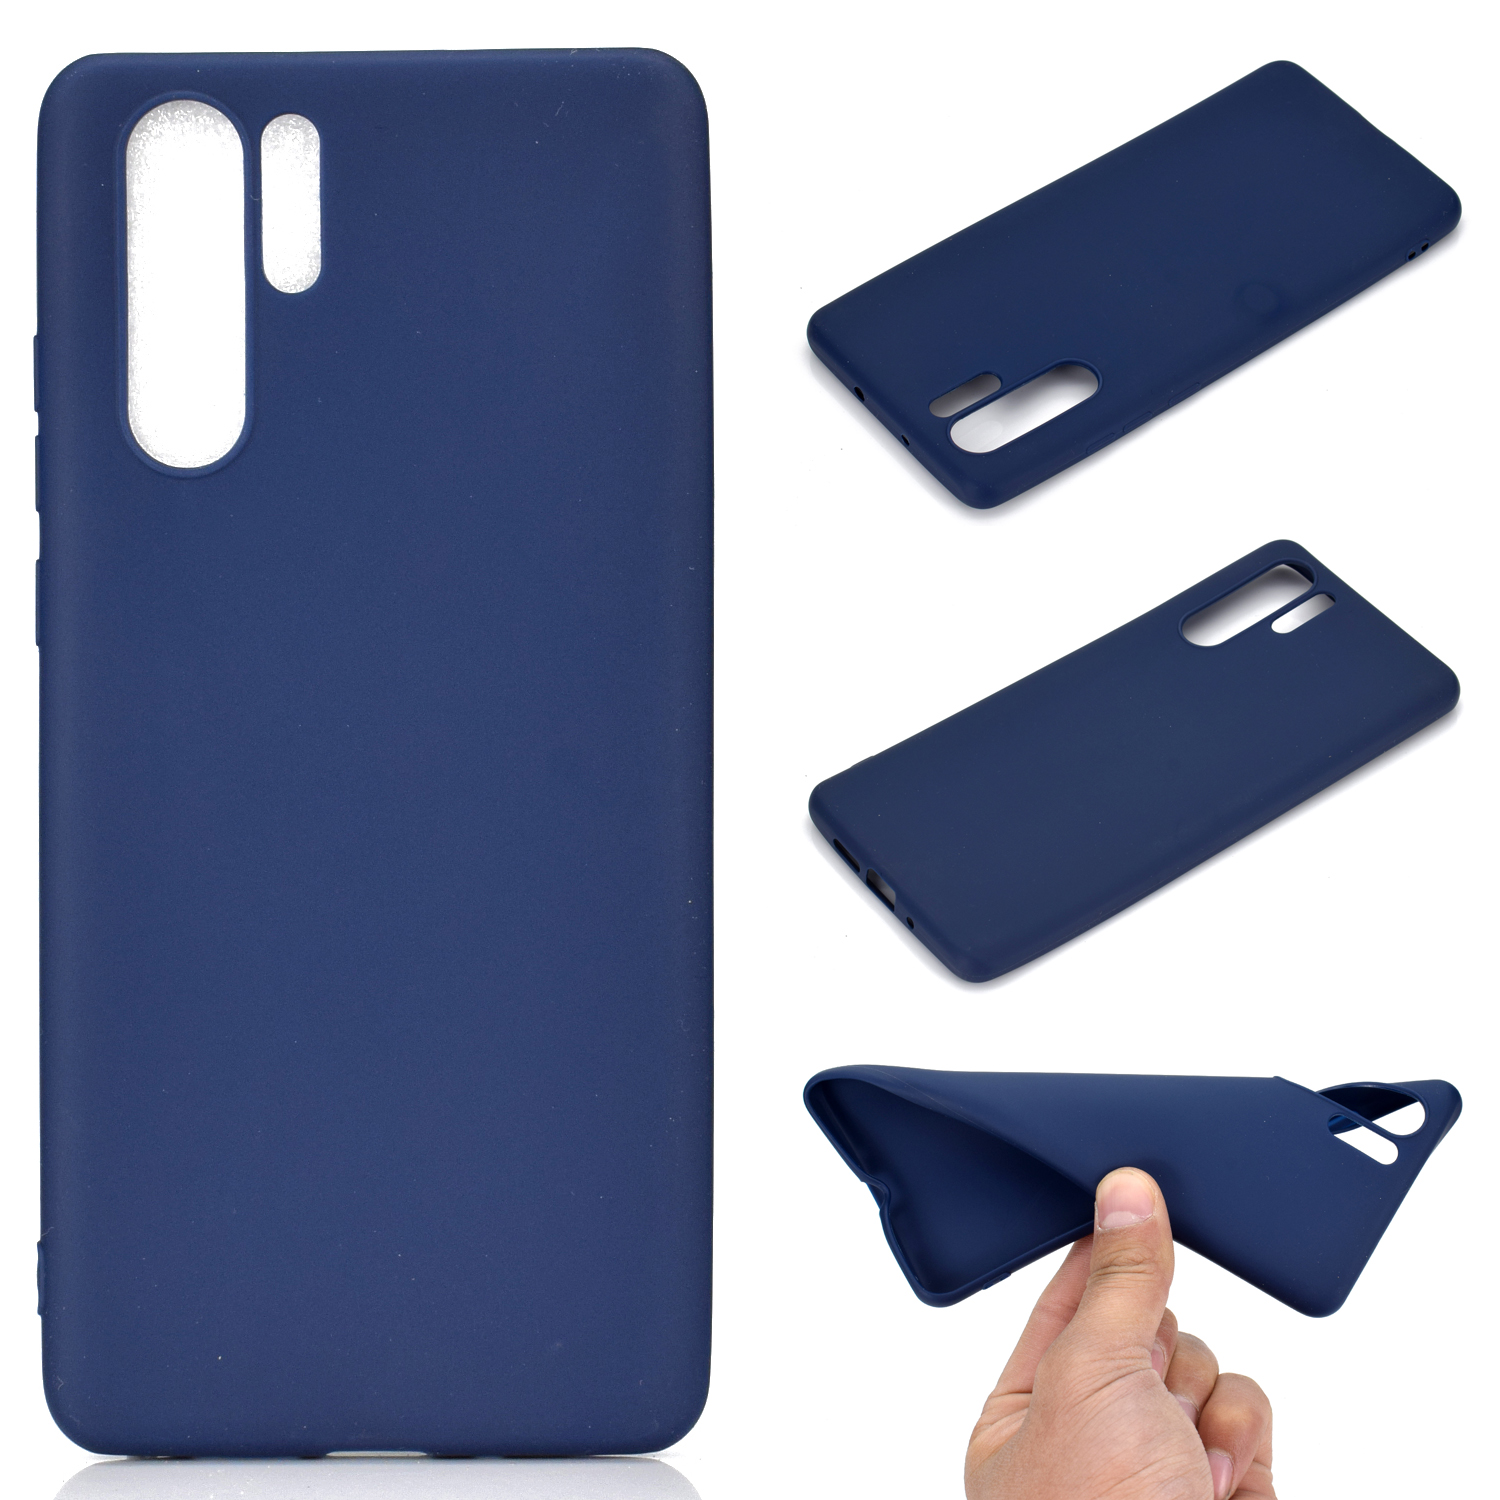 HUAWEI P30 pro Lovely Candy Color Matte TPU Anti-scratch Non-slip Protective Cover Back Case Navy